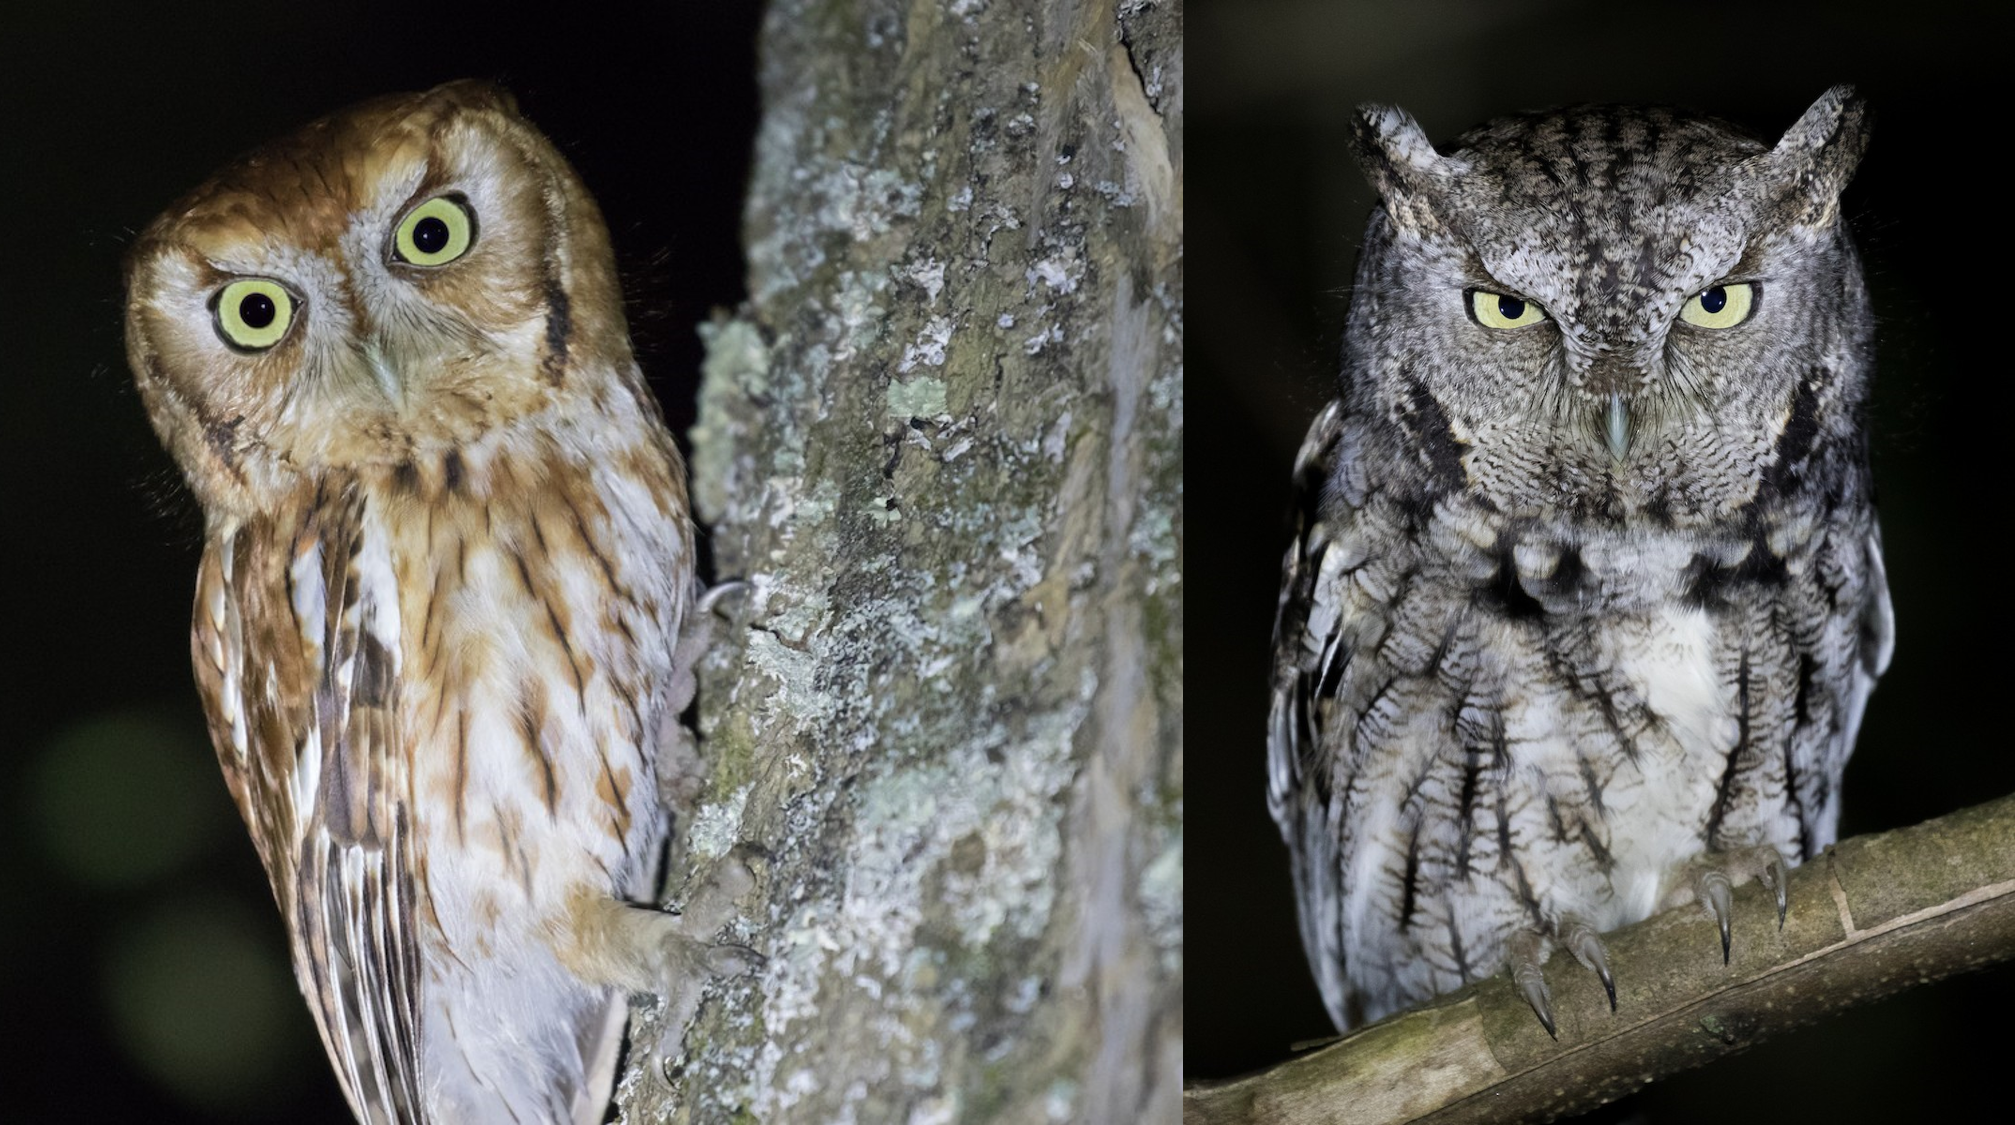 Two screech-owls side by side, one red and one gray.